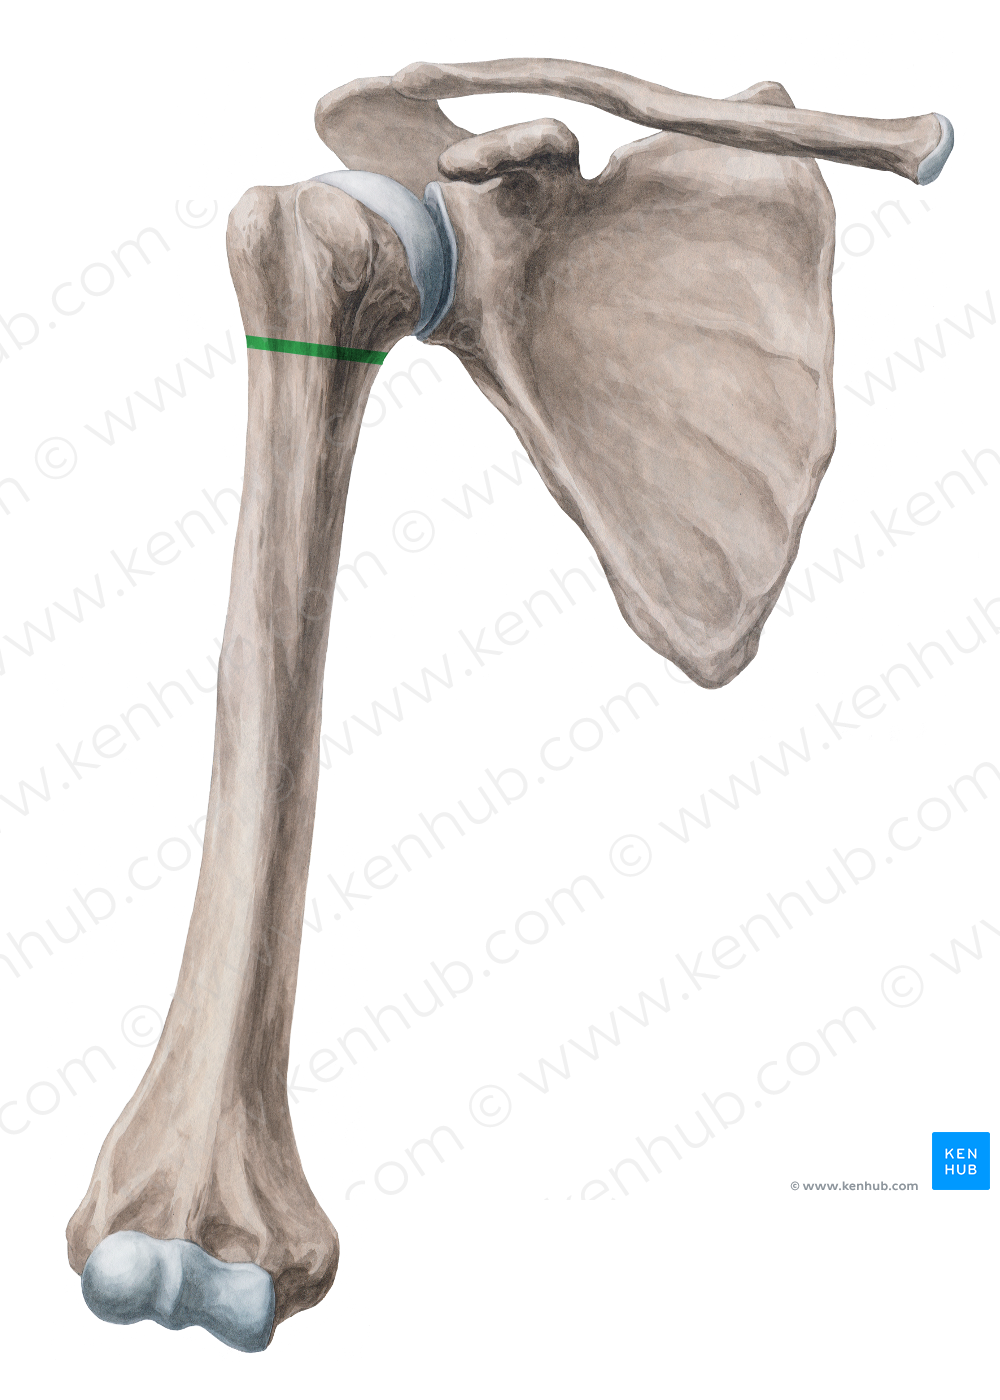 Surgical neck of humerus (#2676)